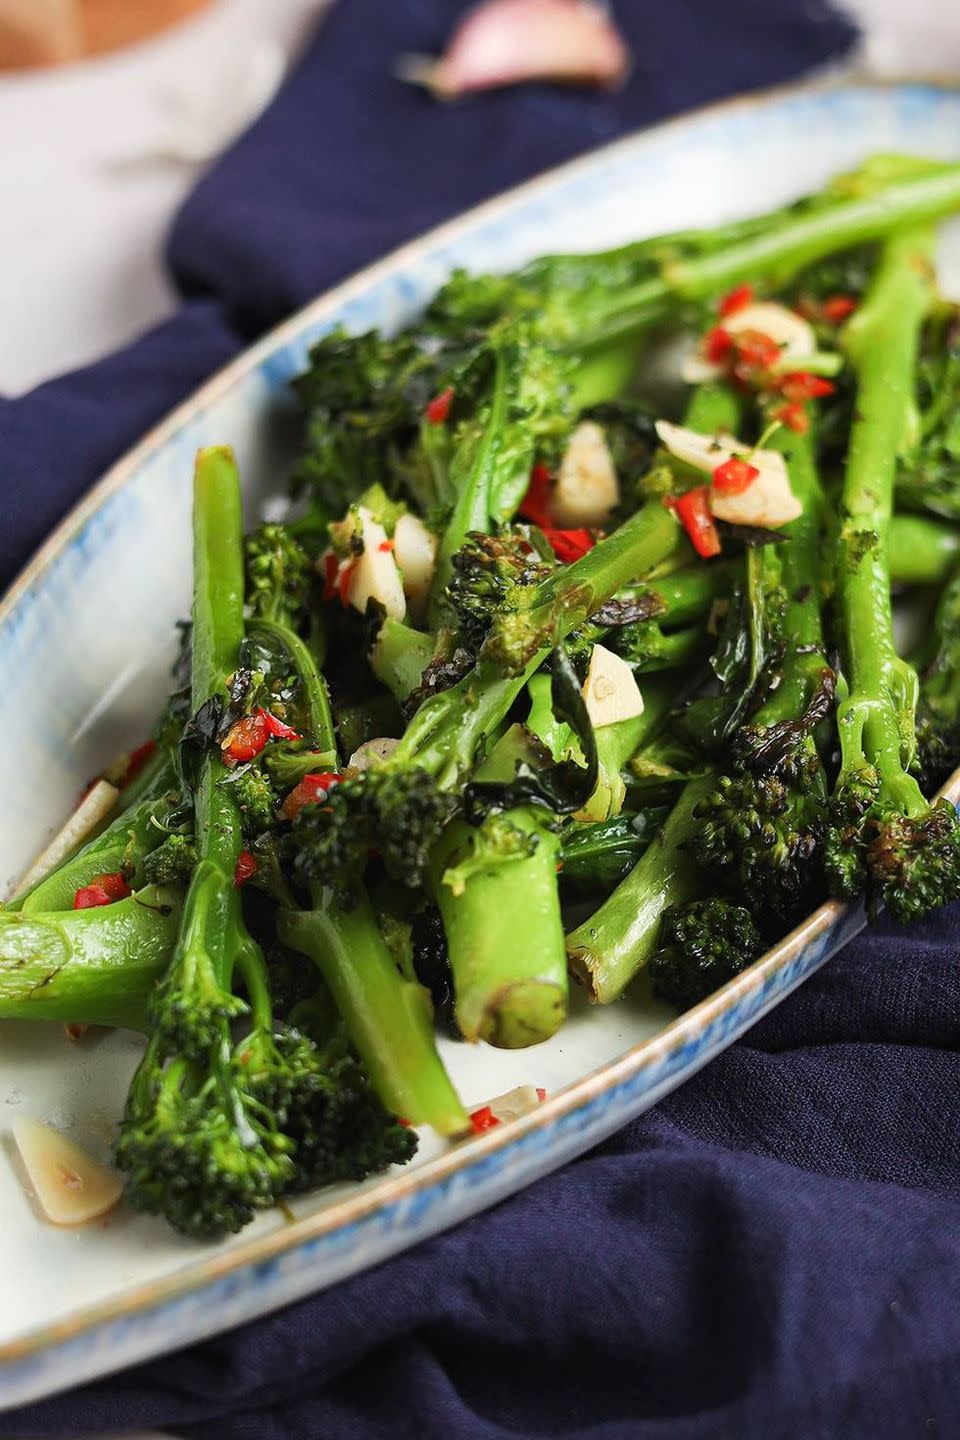 Purple Sprouting Broccoli with Chilli, Garlic and Lemon